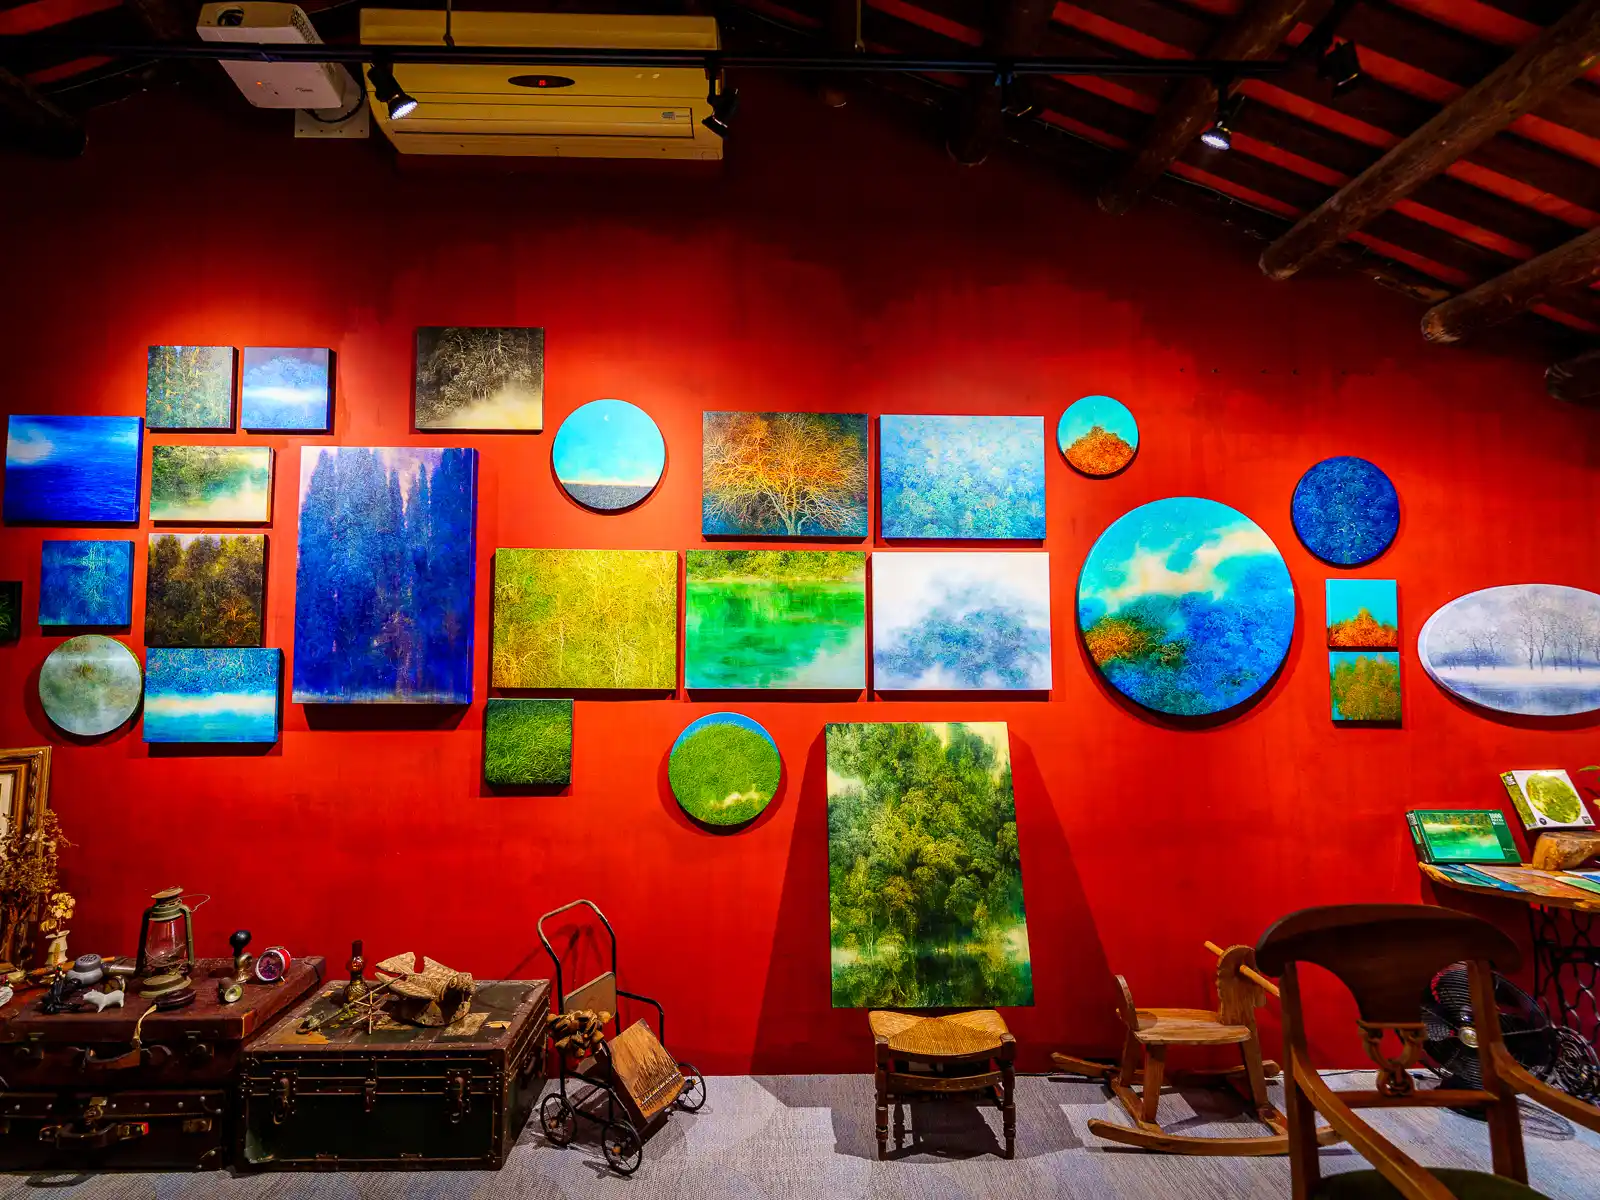 Paintings are on display against a bright red colored wall in the Su Chiung Art Museum.